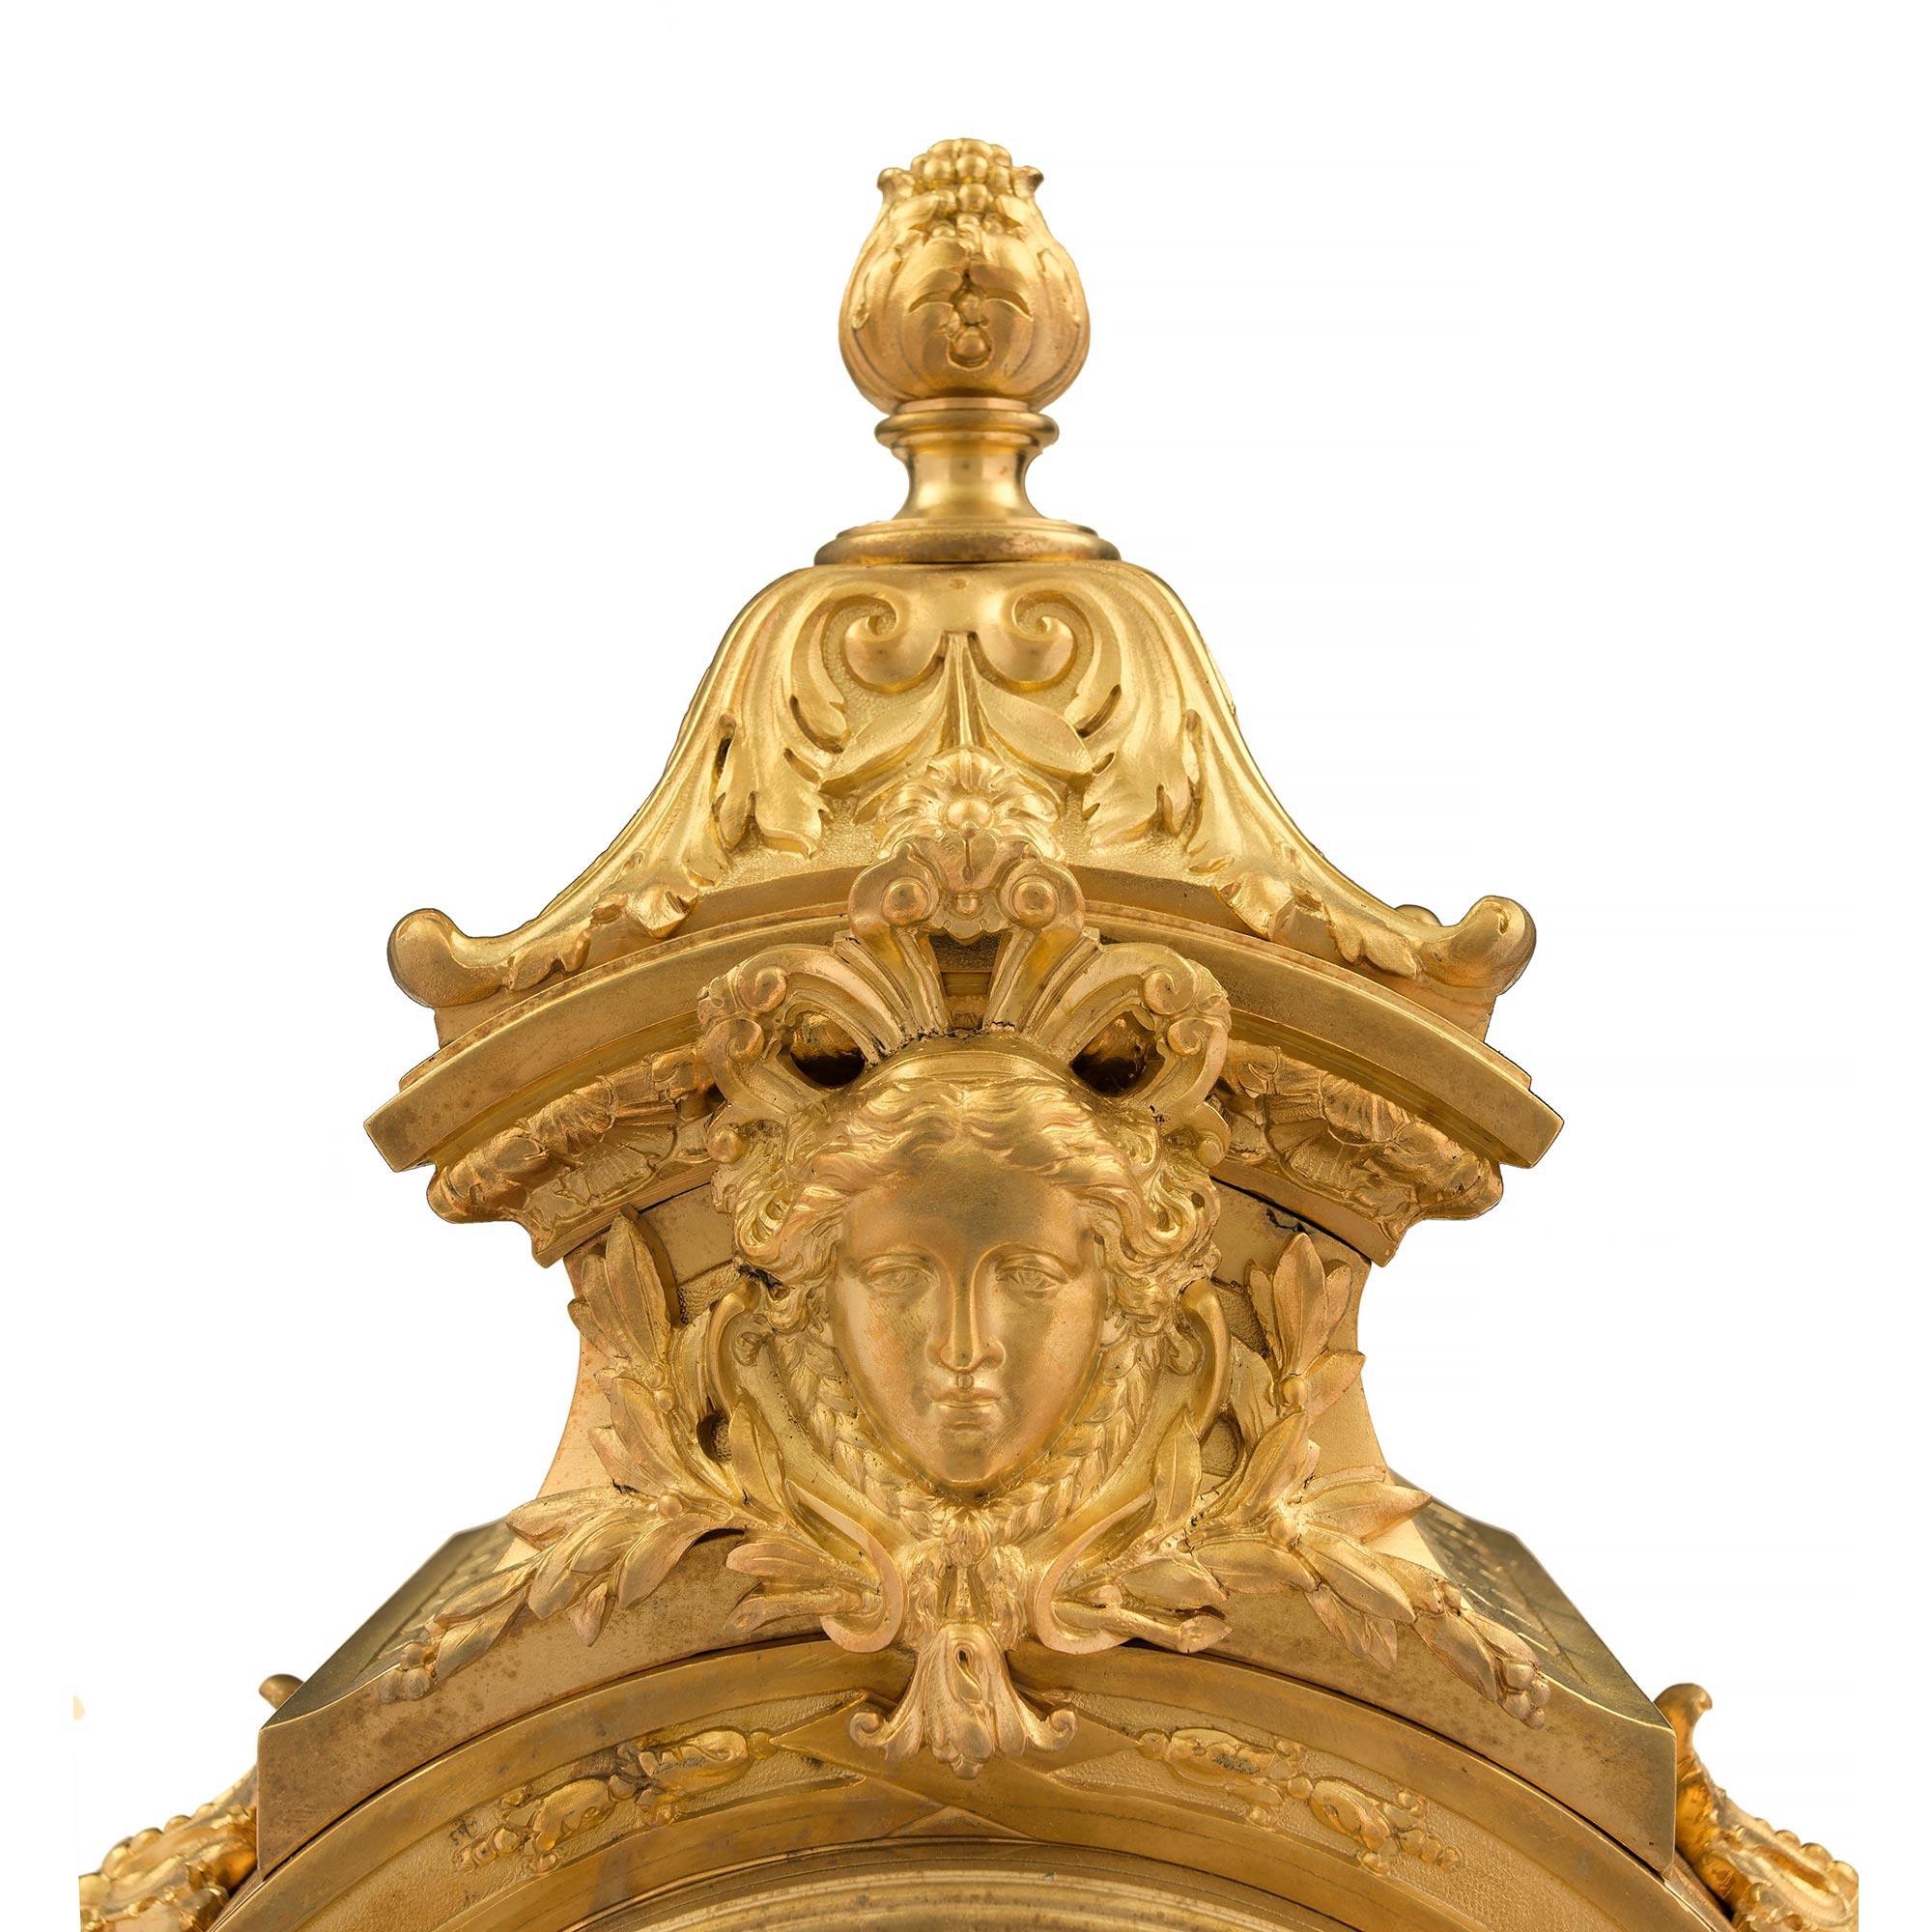 French 19th Century Louis XIV Style Ormolu Cartel Clock In Good Condition For Sale In West Palm Beach, FL